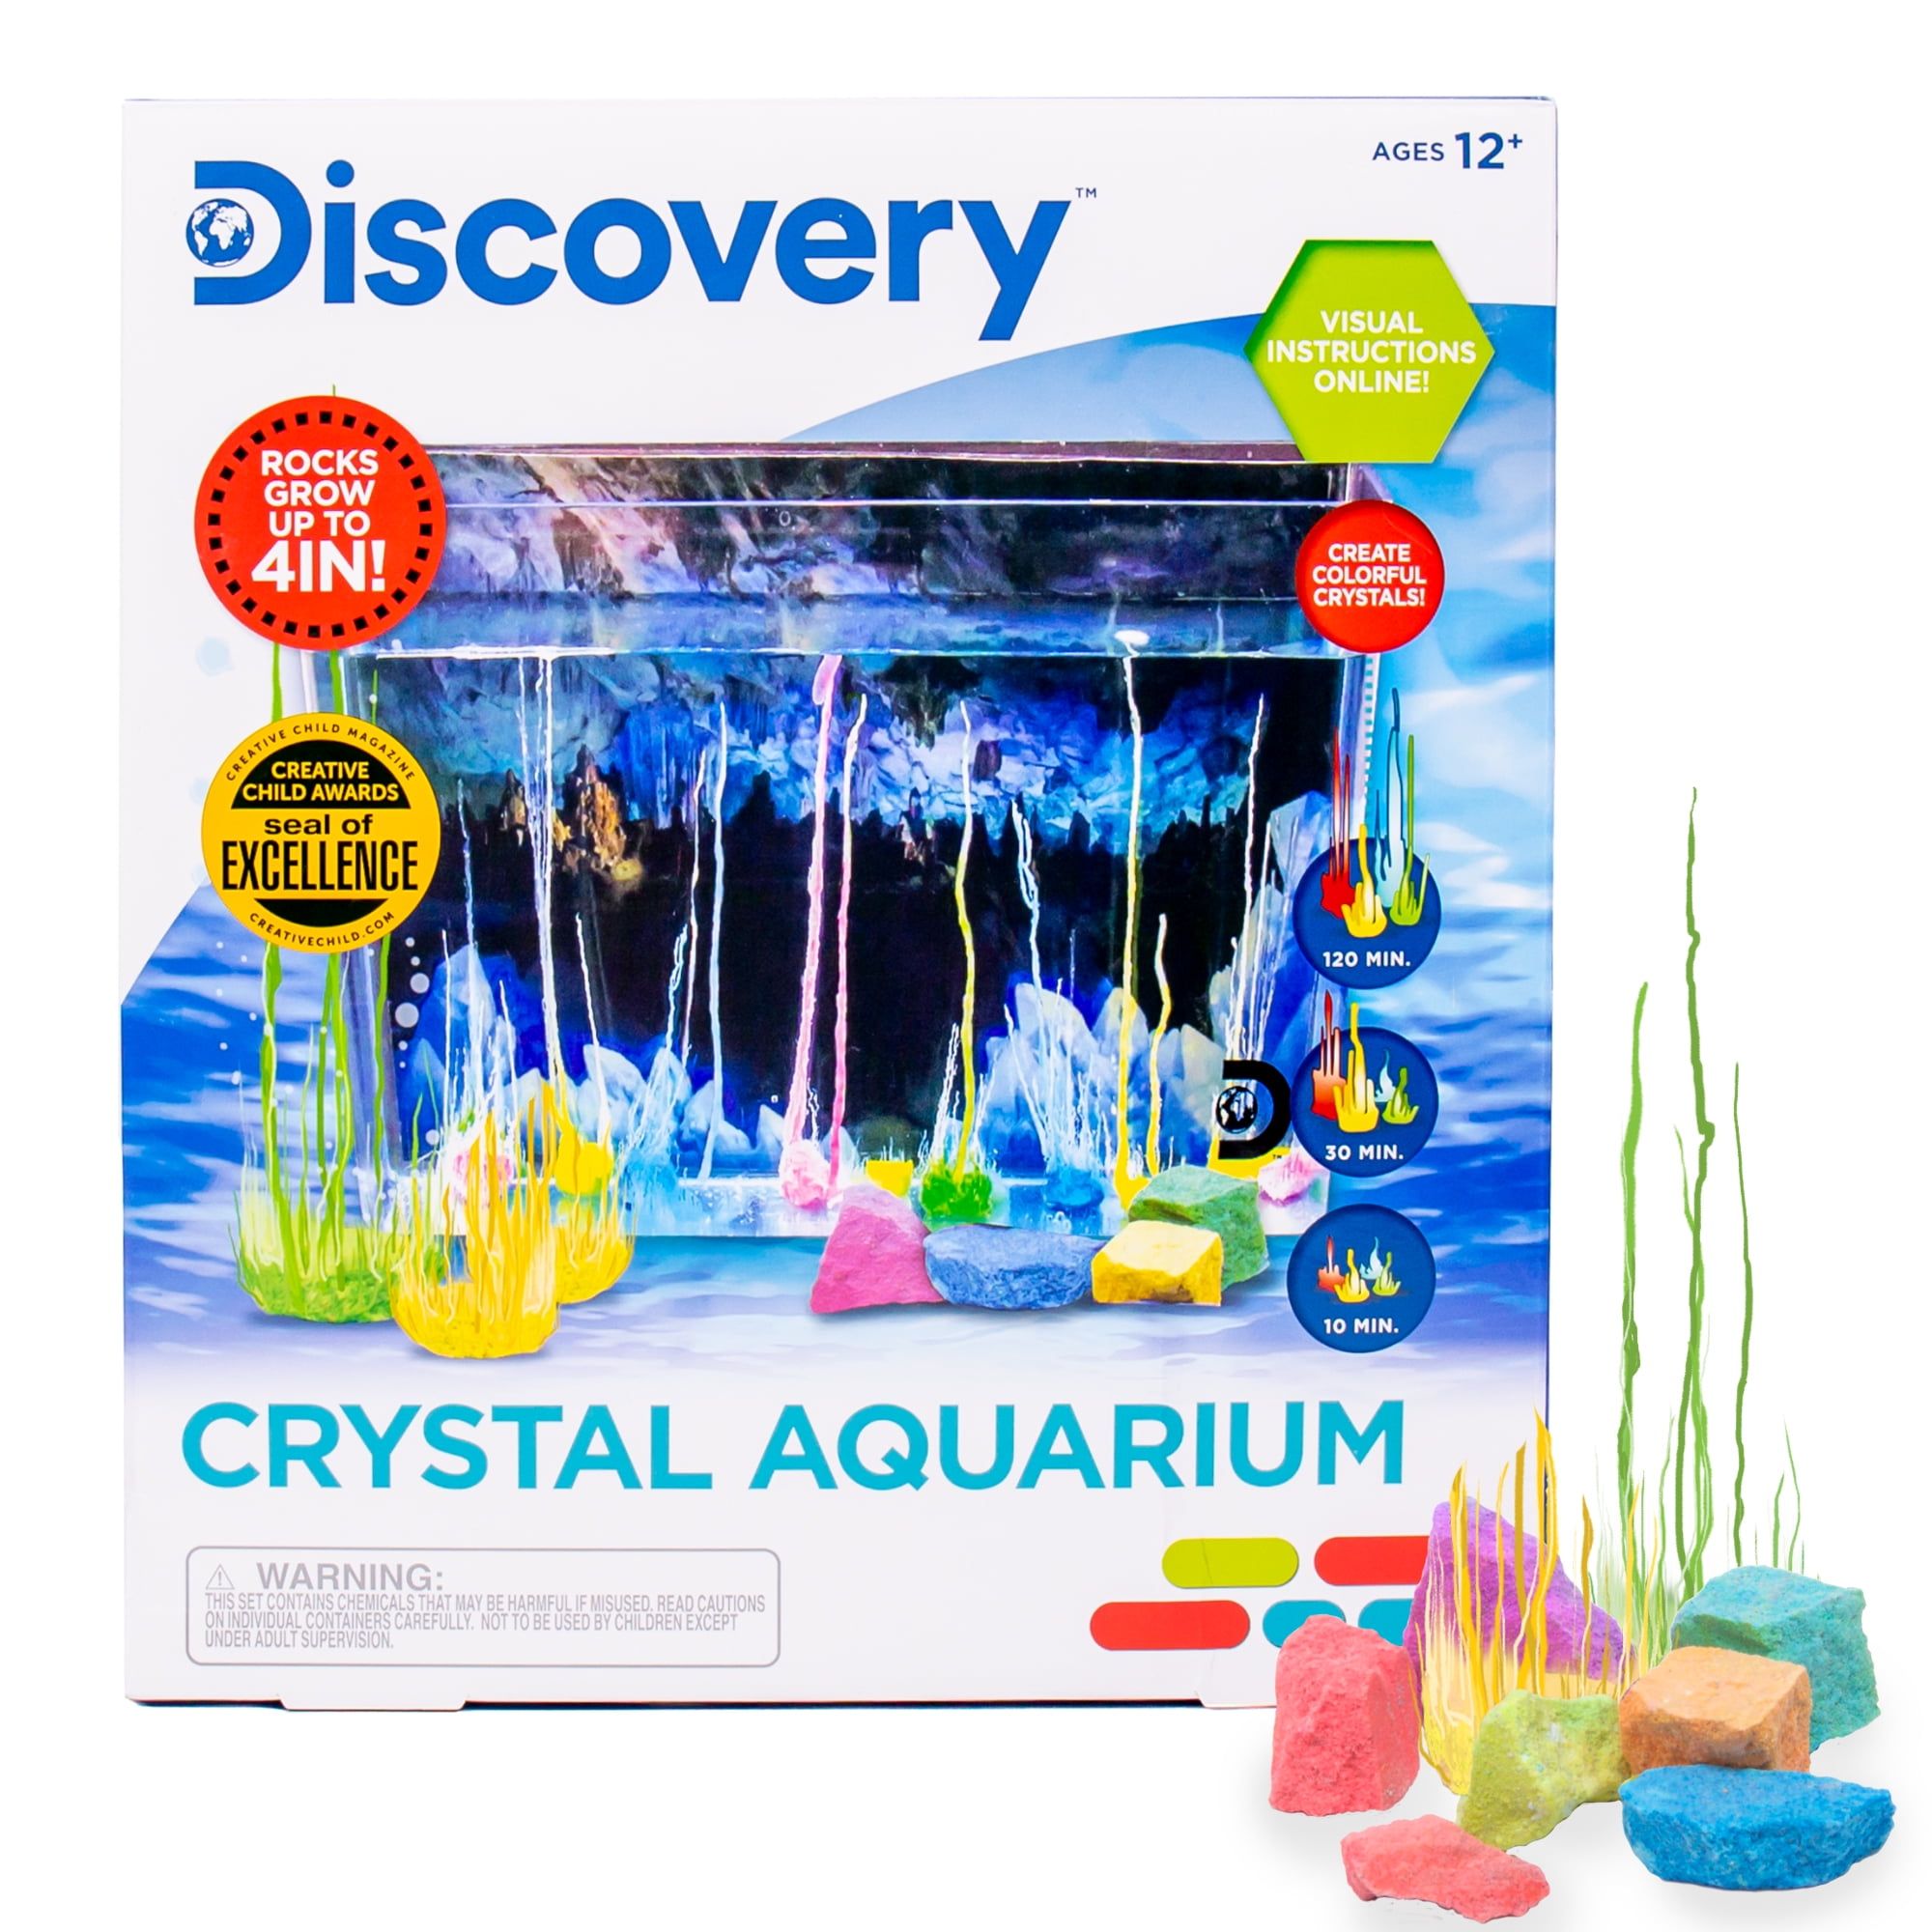 Grow Your Own Crystals Set Kids School Science Girls Boys Chemistry Biology Gift